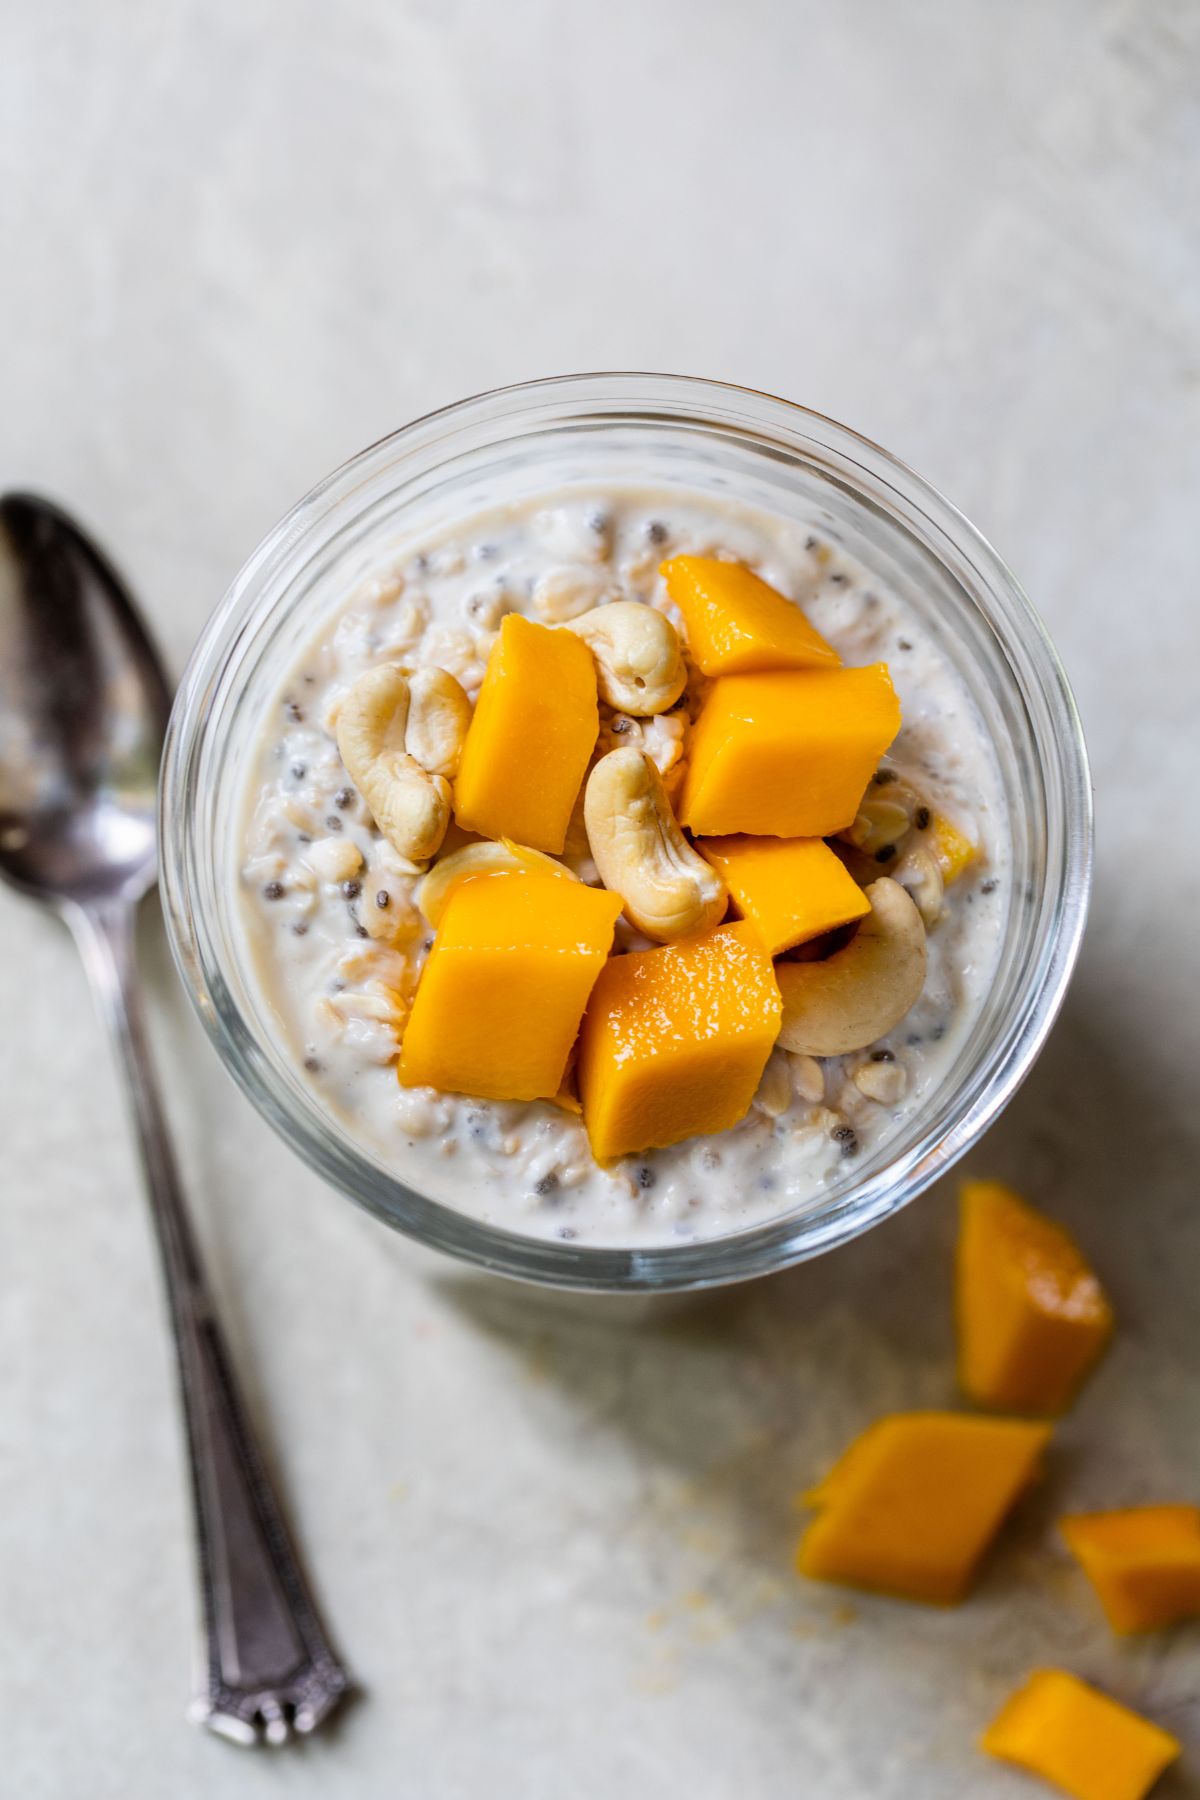 Mango overnight oats served with cashews on top.